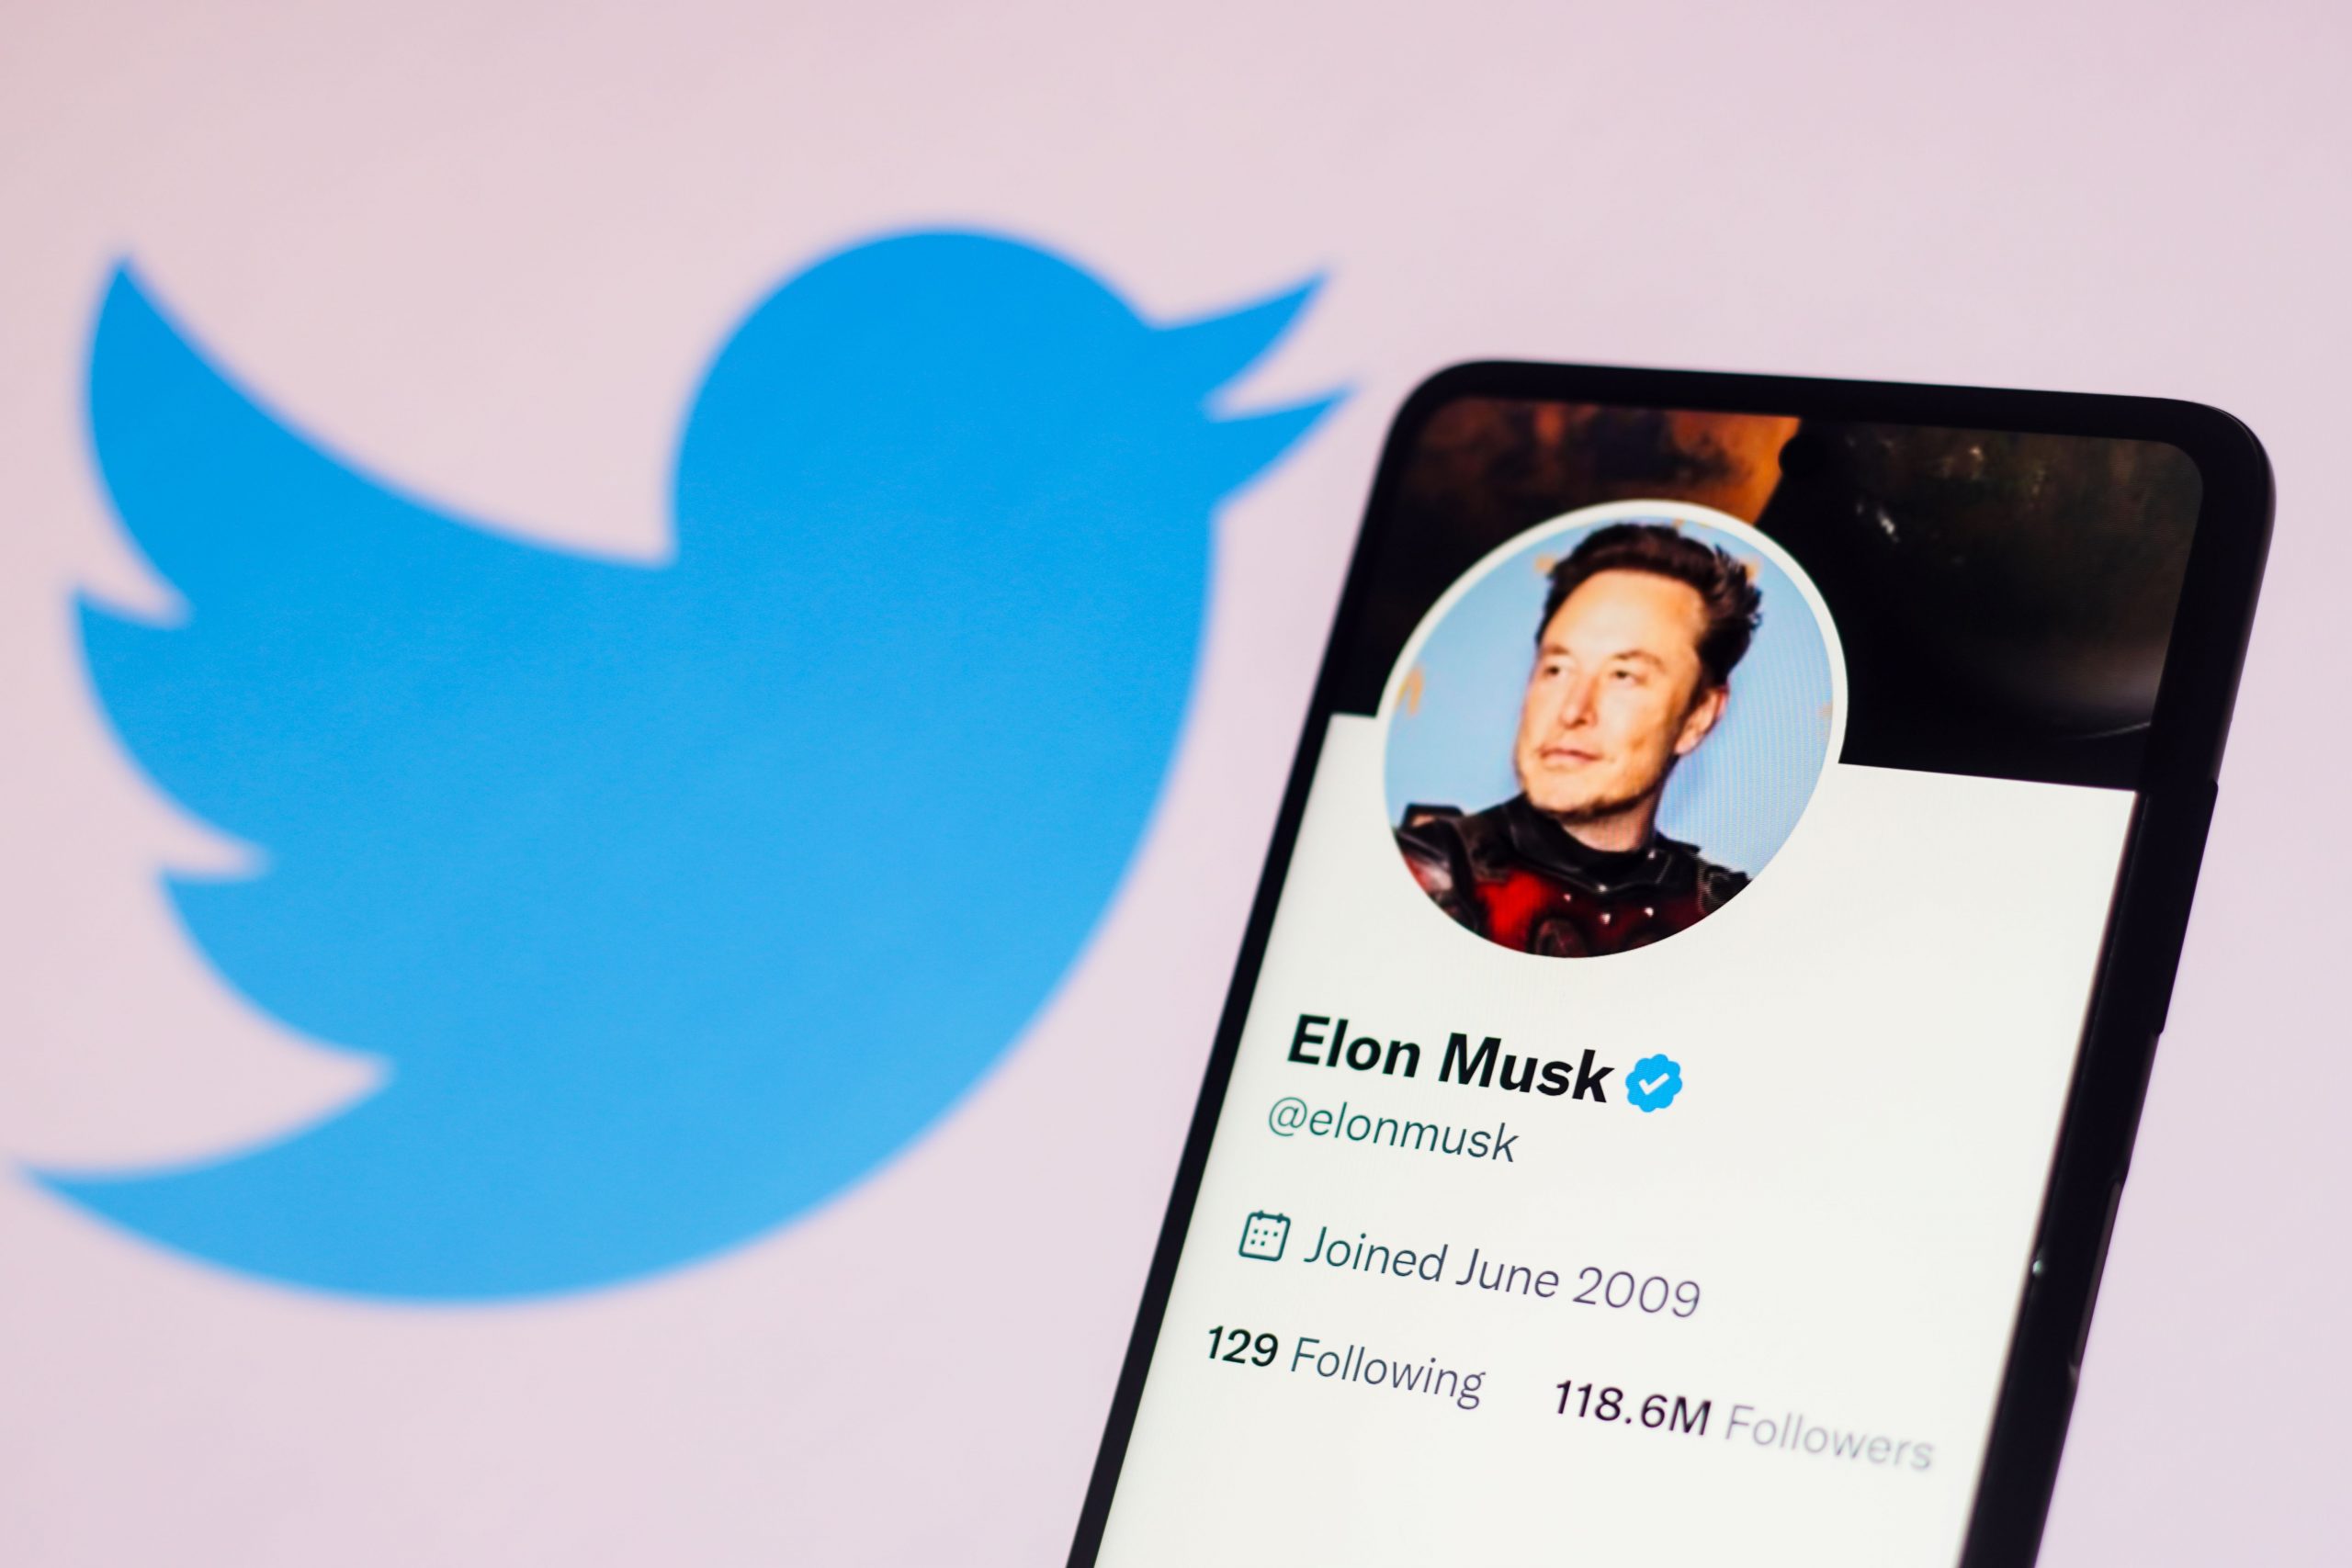 A picture of a phone with Elon Musk's account on Twitter and the blue bird Twitter logo in the background